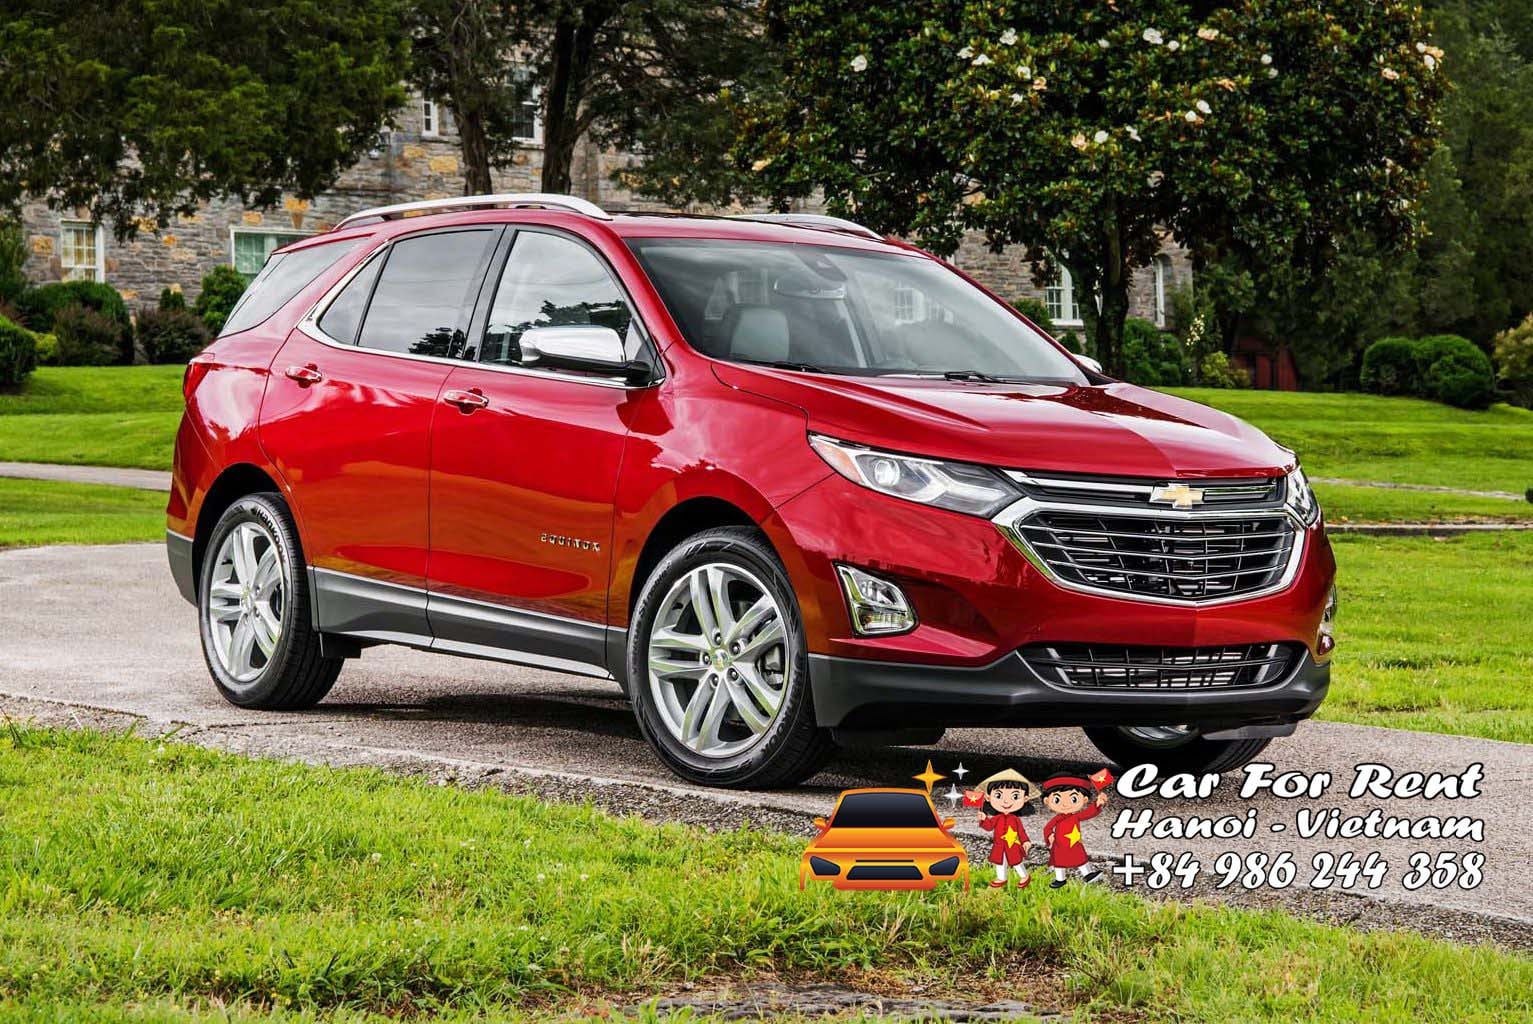 Chevrolet Equinox phone number for admiral car insurance